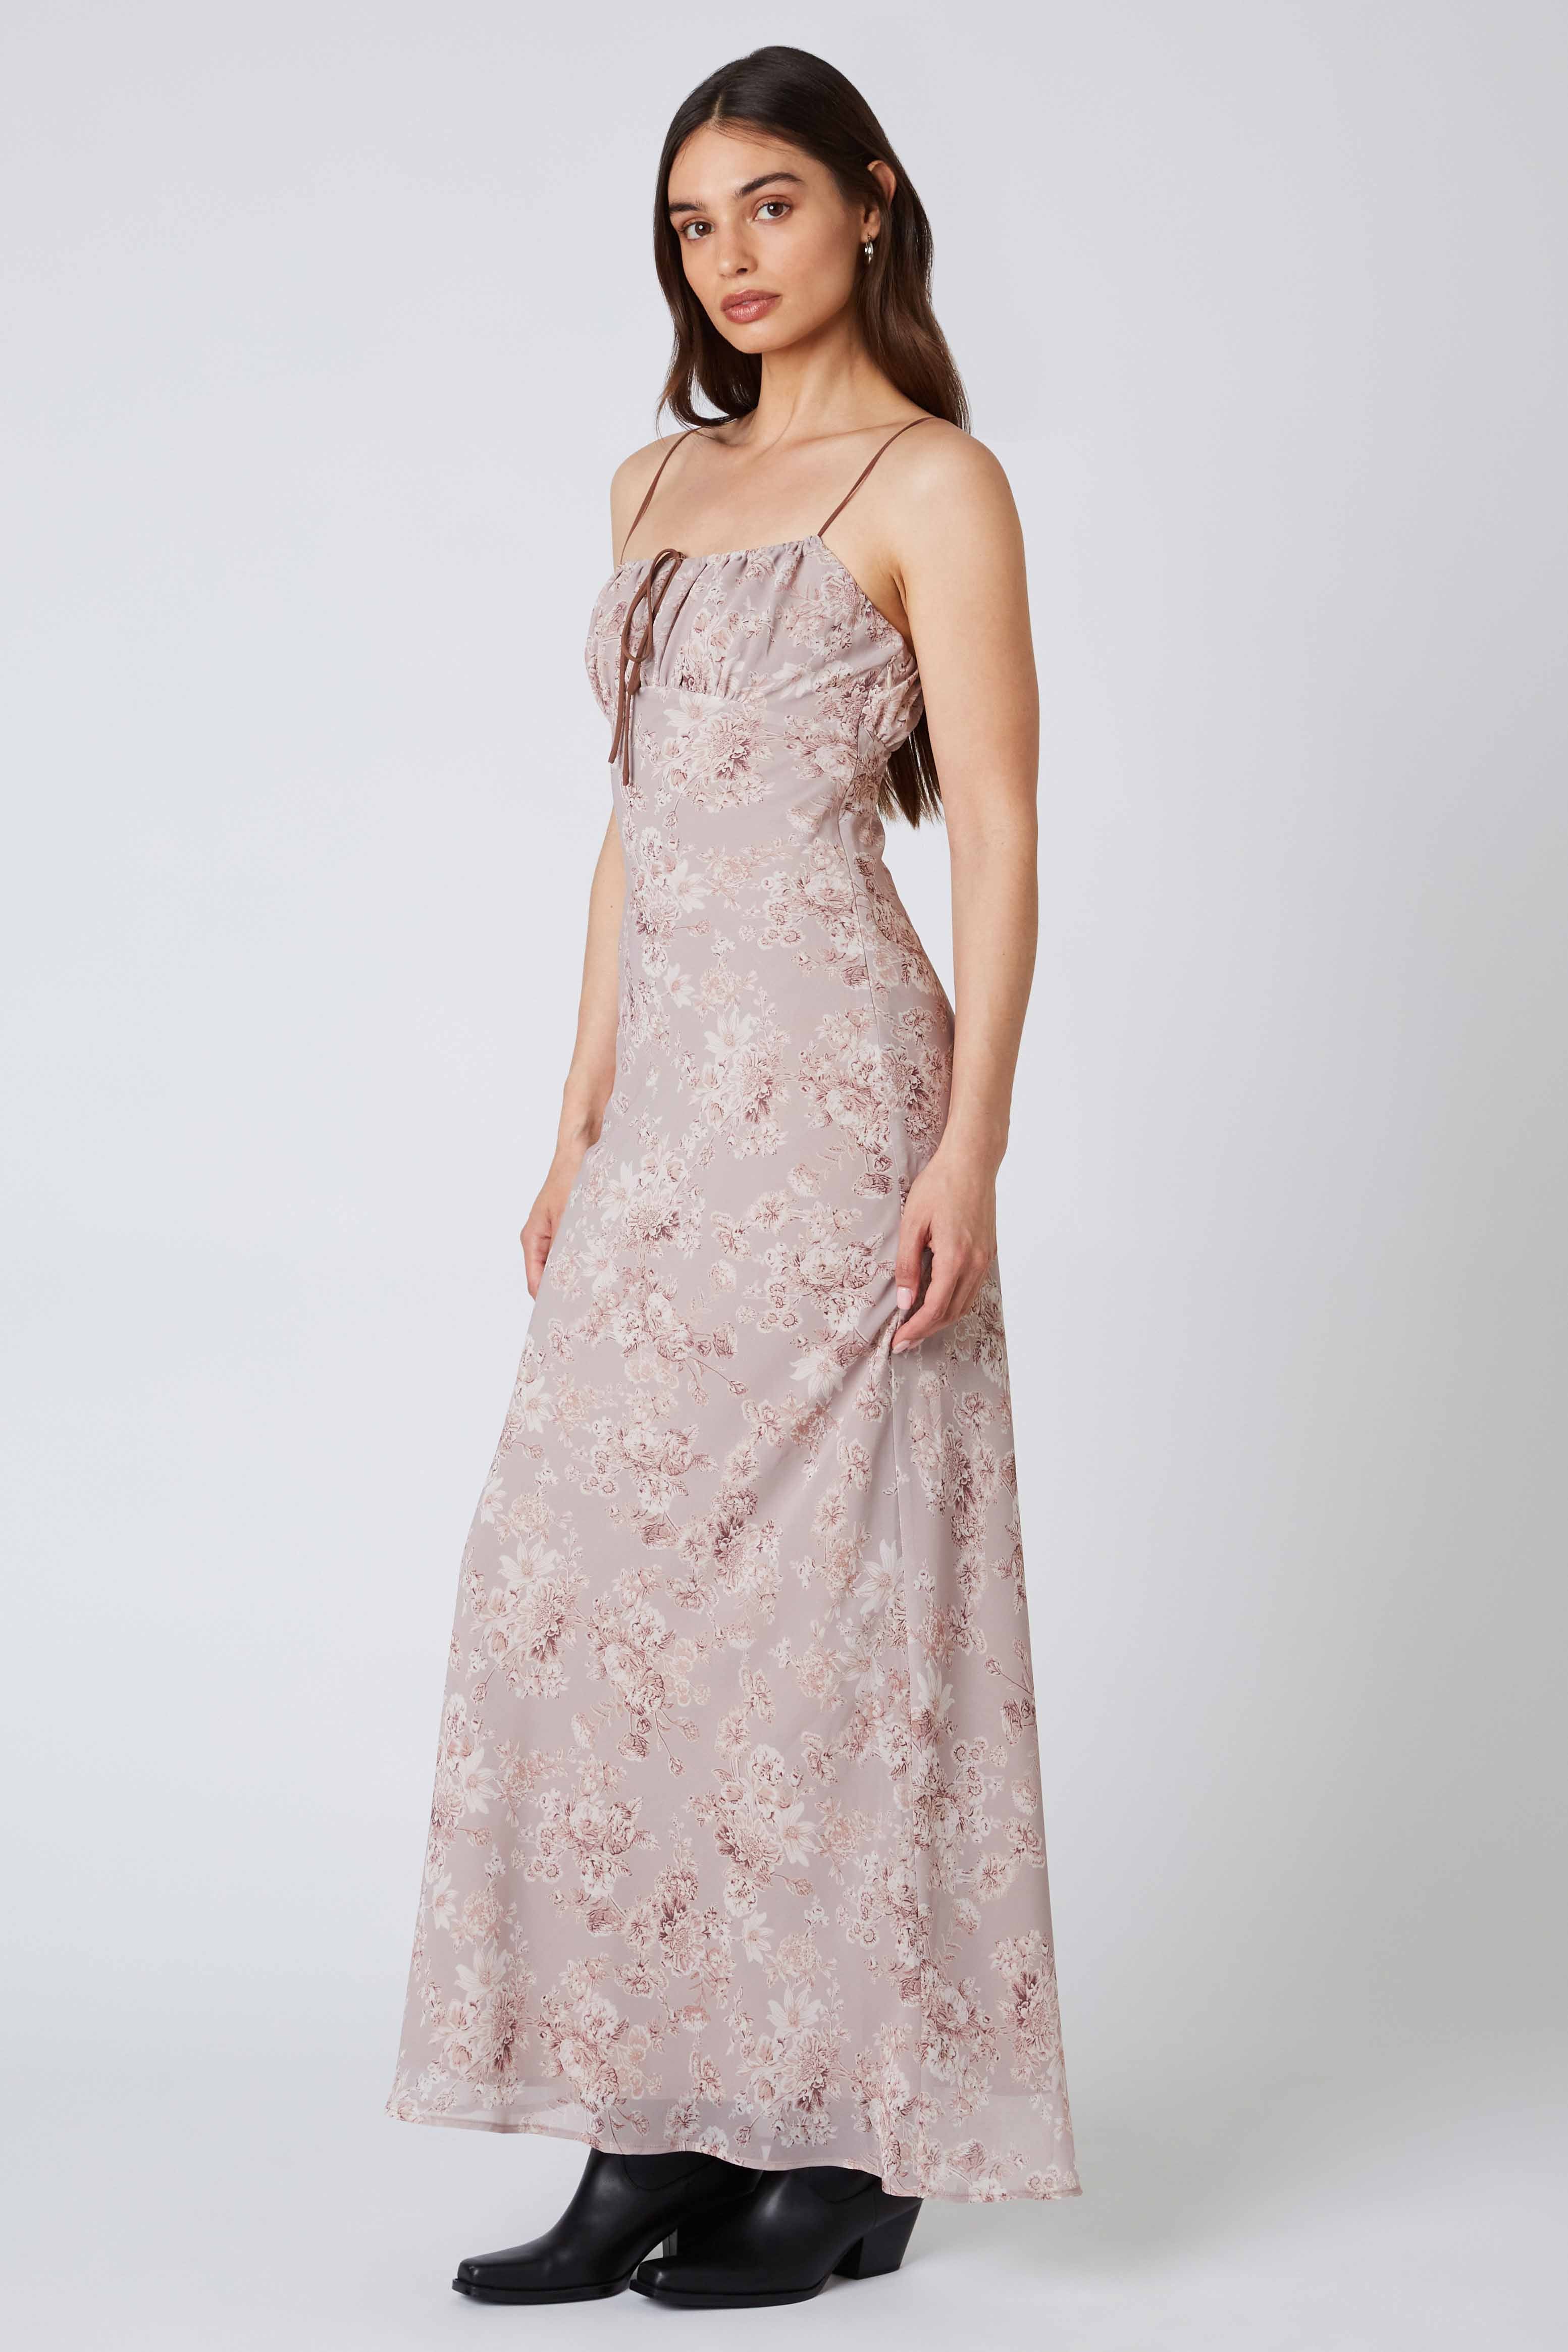 Floral Maxi Dress in Mocha Side View